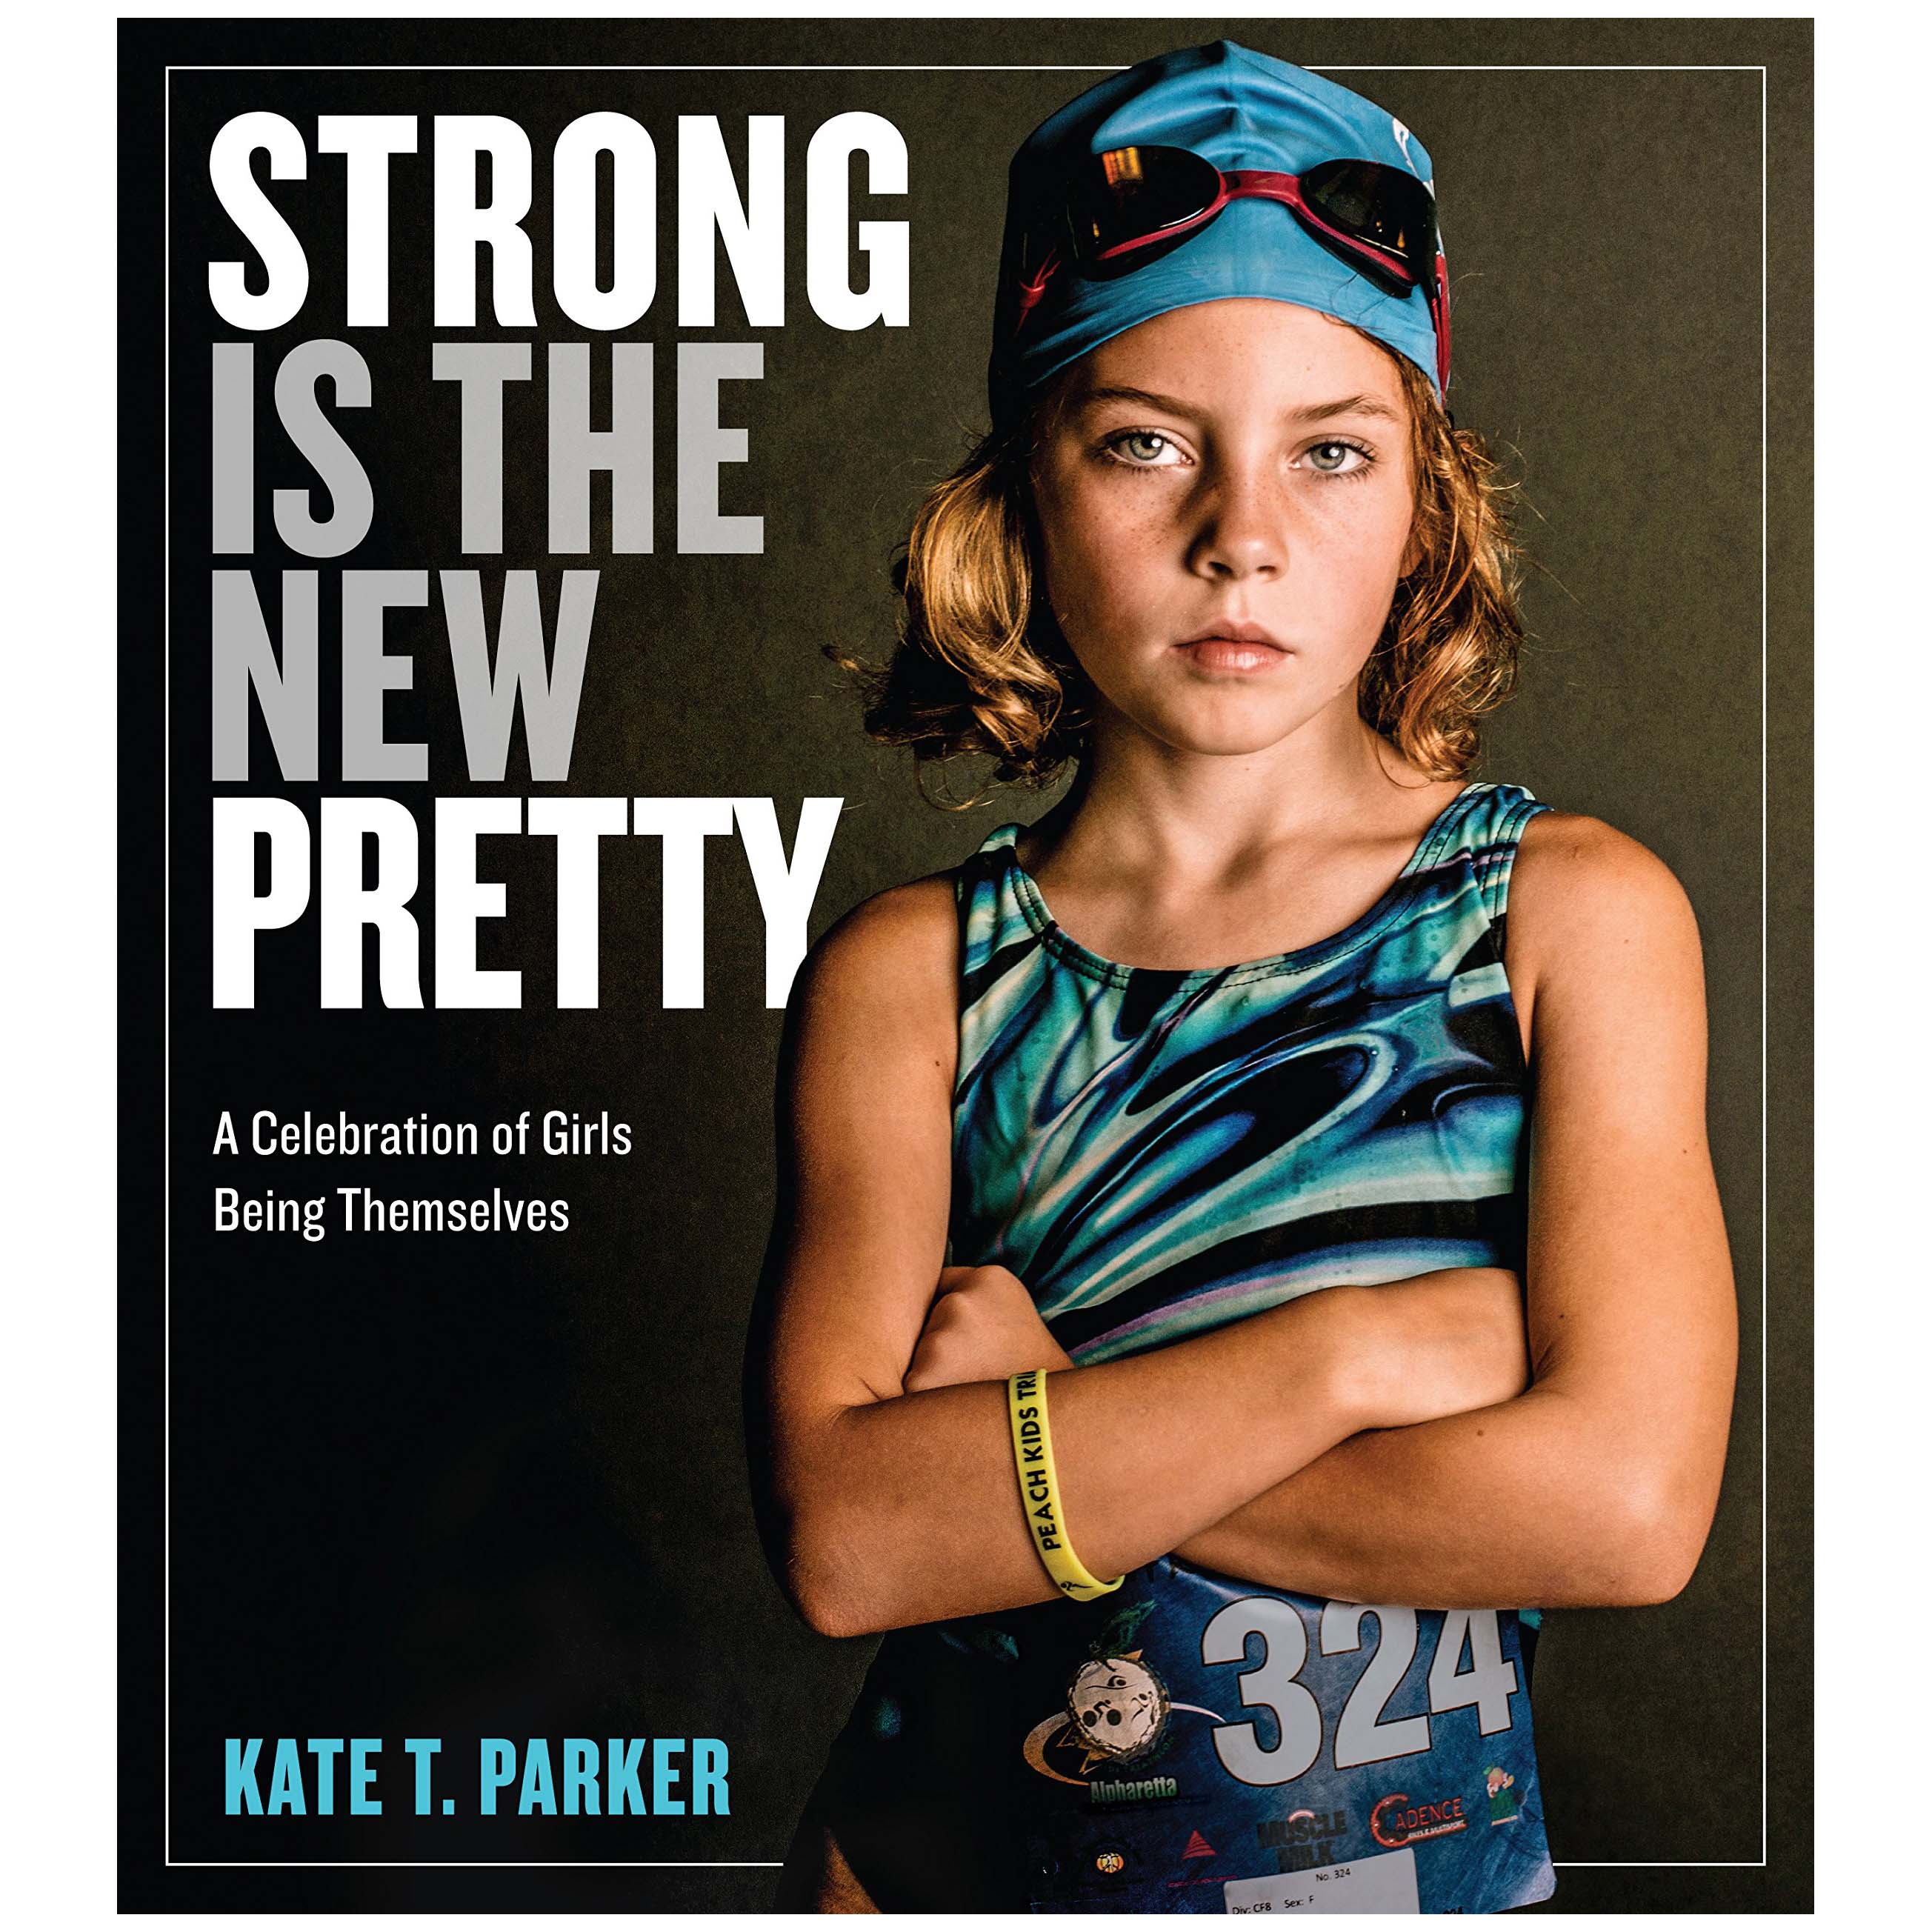 LIBRO STRONG IS THE NEW PRETTY (KATE T. PARKER)